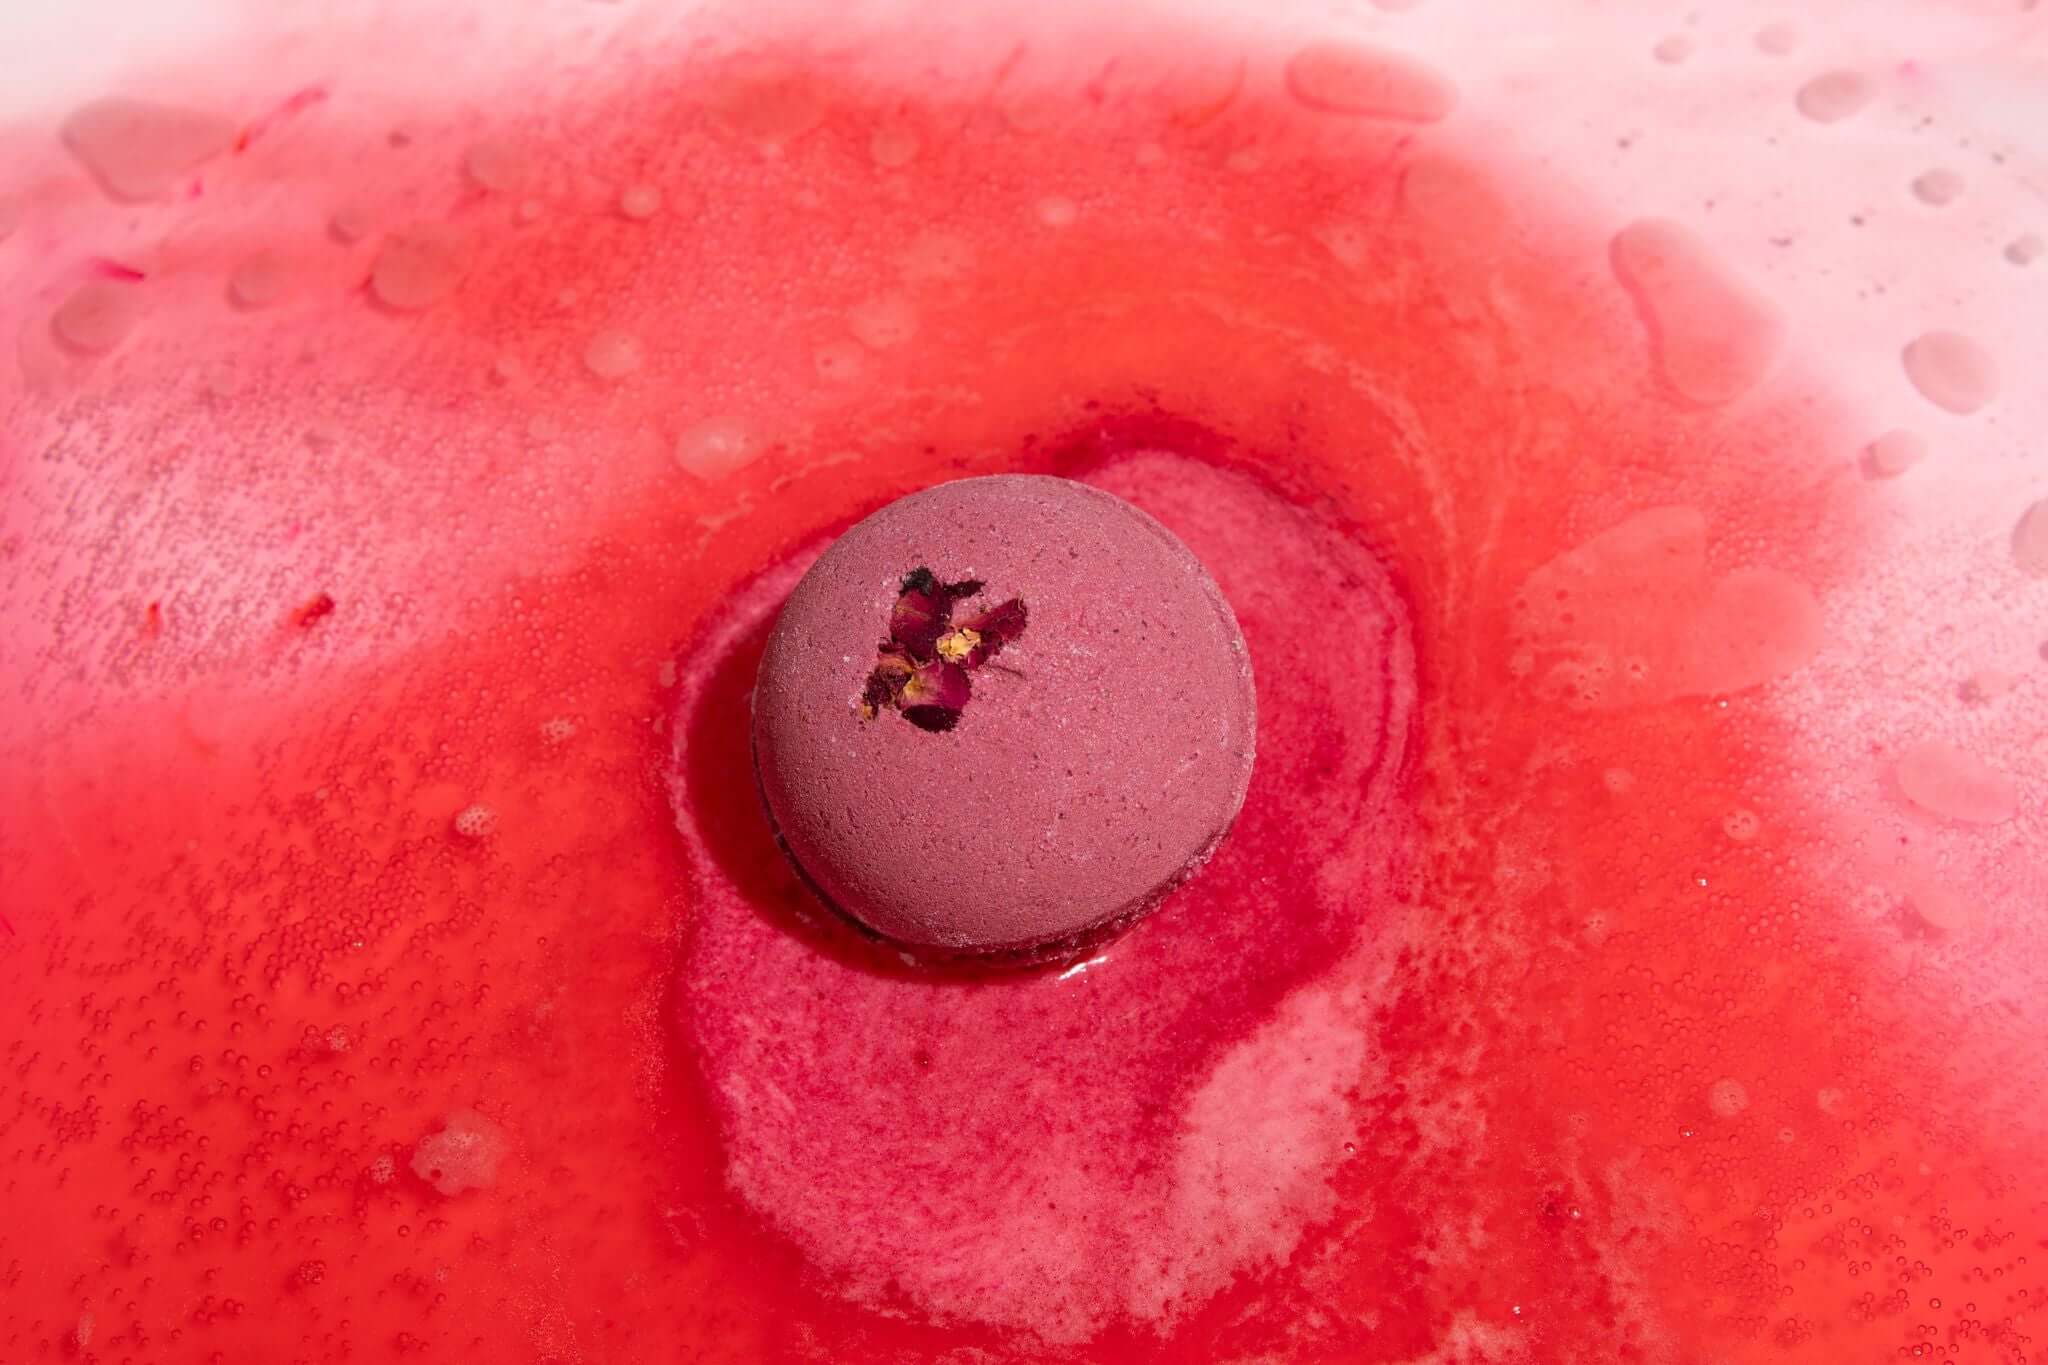 Tub Therapy | The best Wine & Roses CBD bath bomb fizzing in water, turning it a vibrant red but doesn't stain the tub.